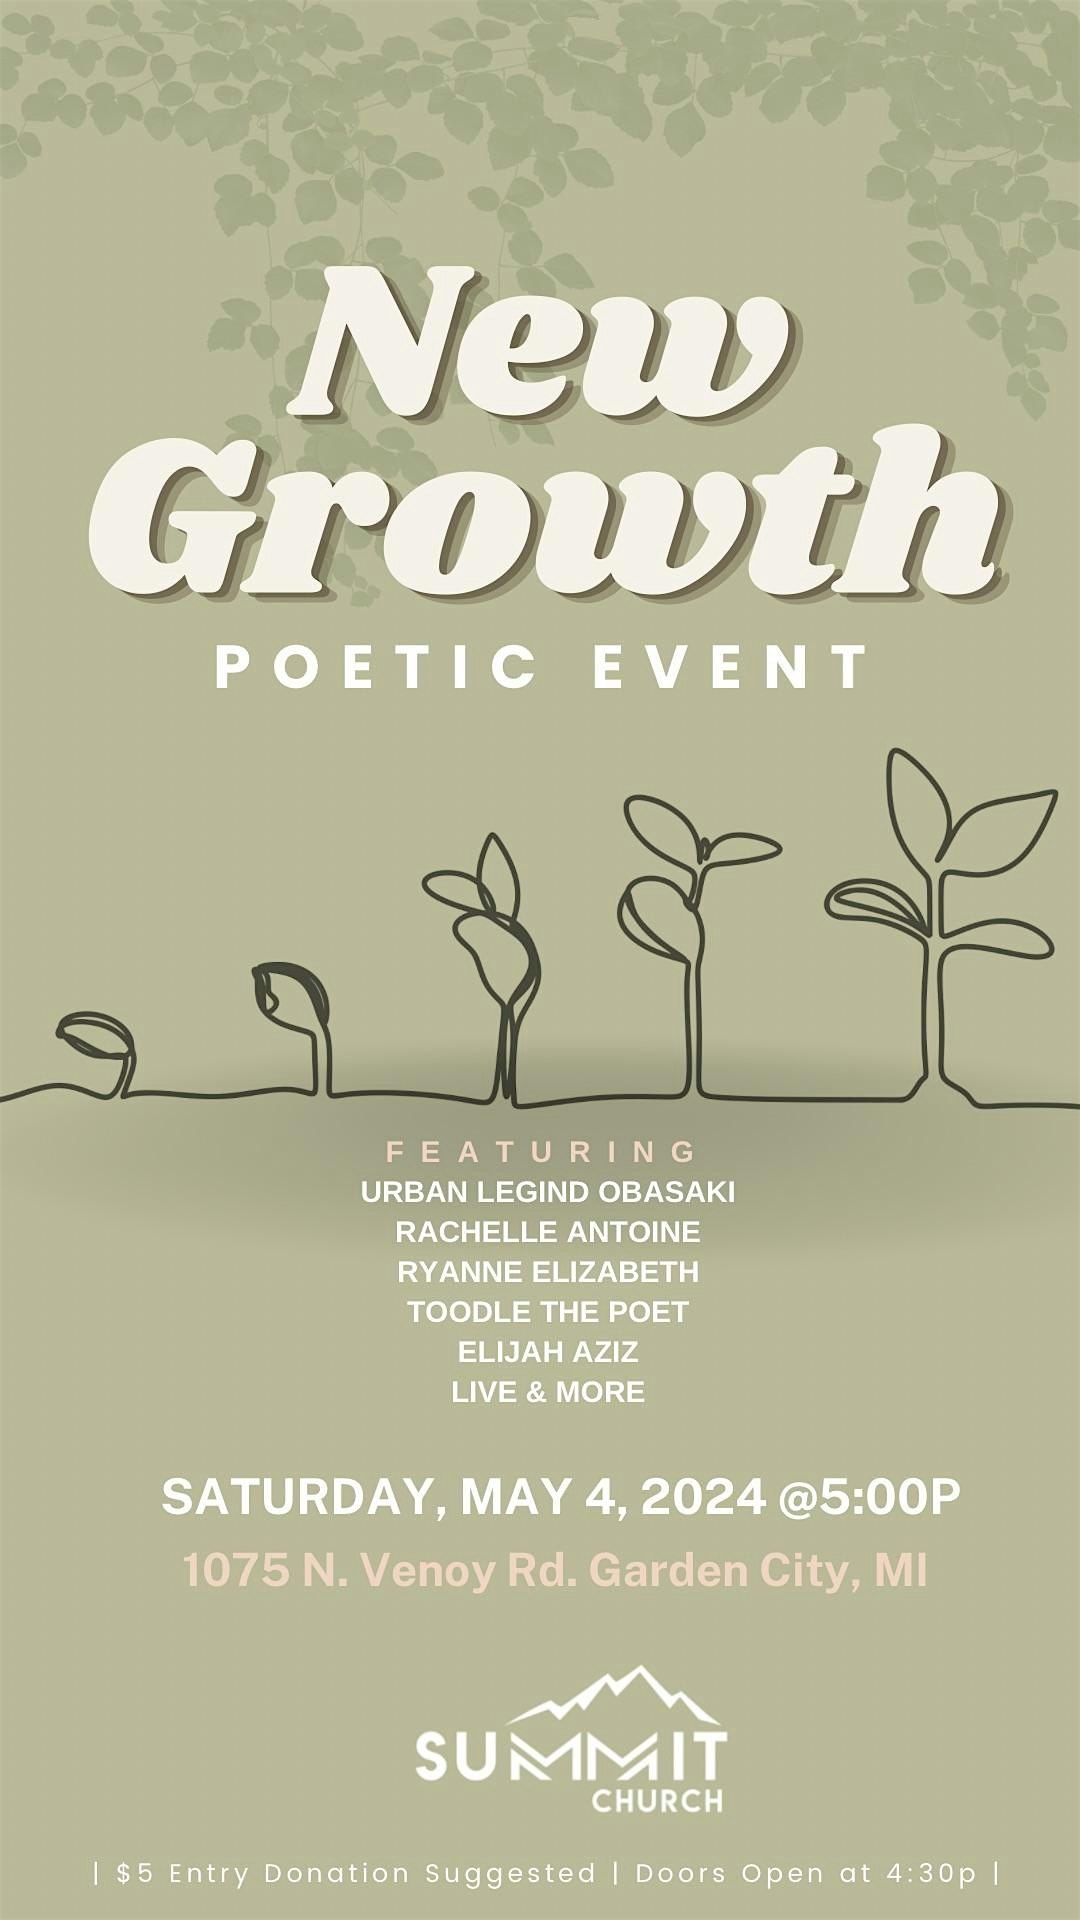 New Growth Poetic Event